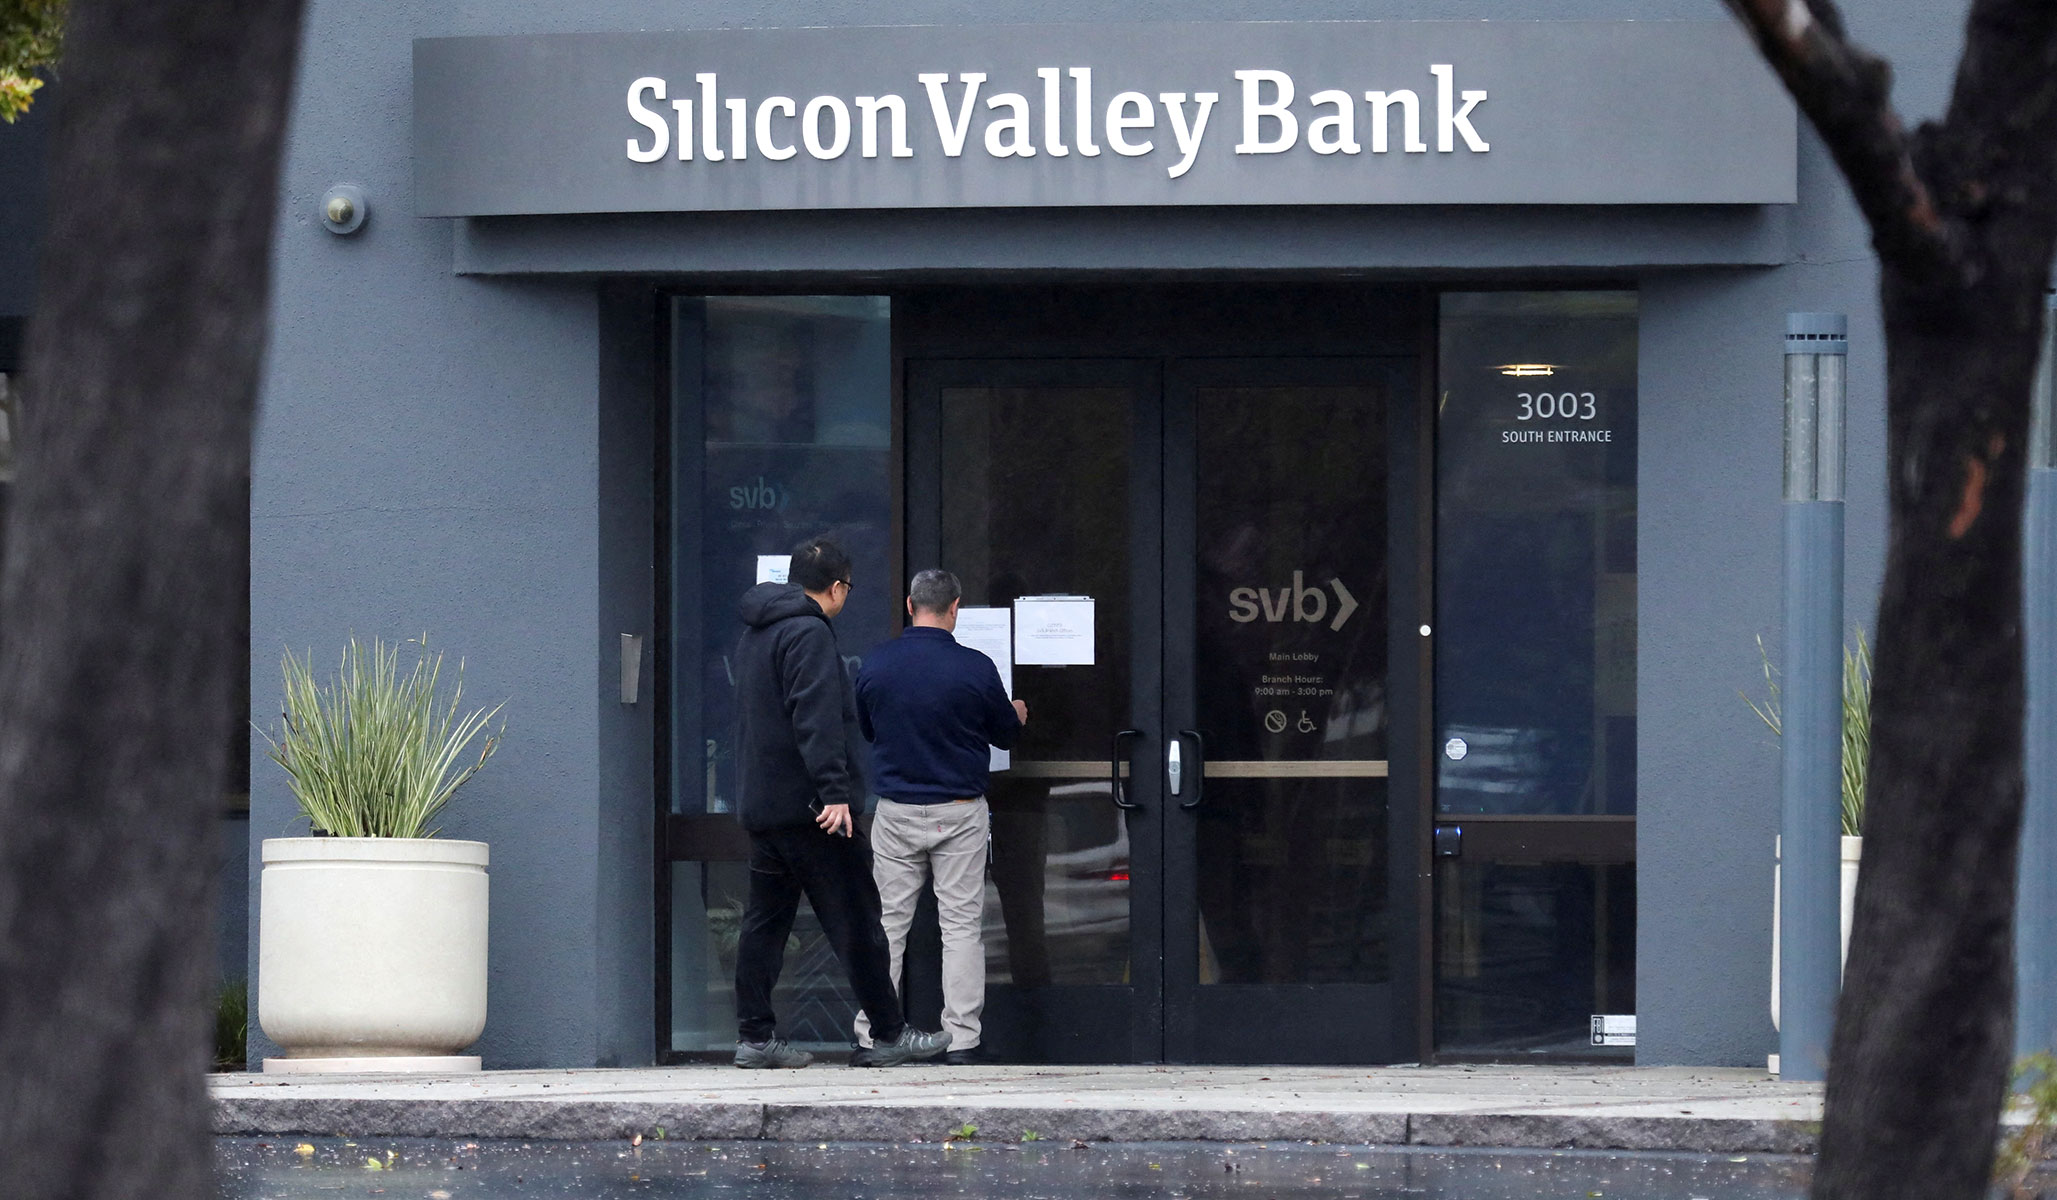 The real reason Silicon Valley bank collapsed

End-shutdown